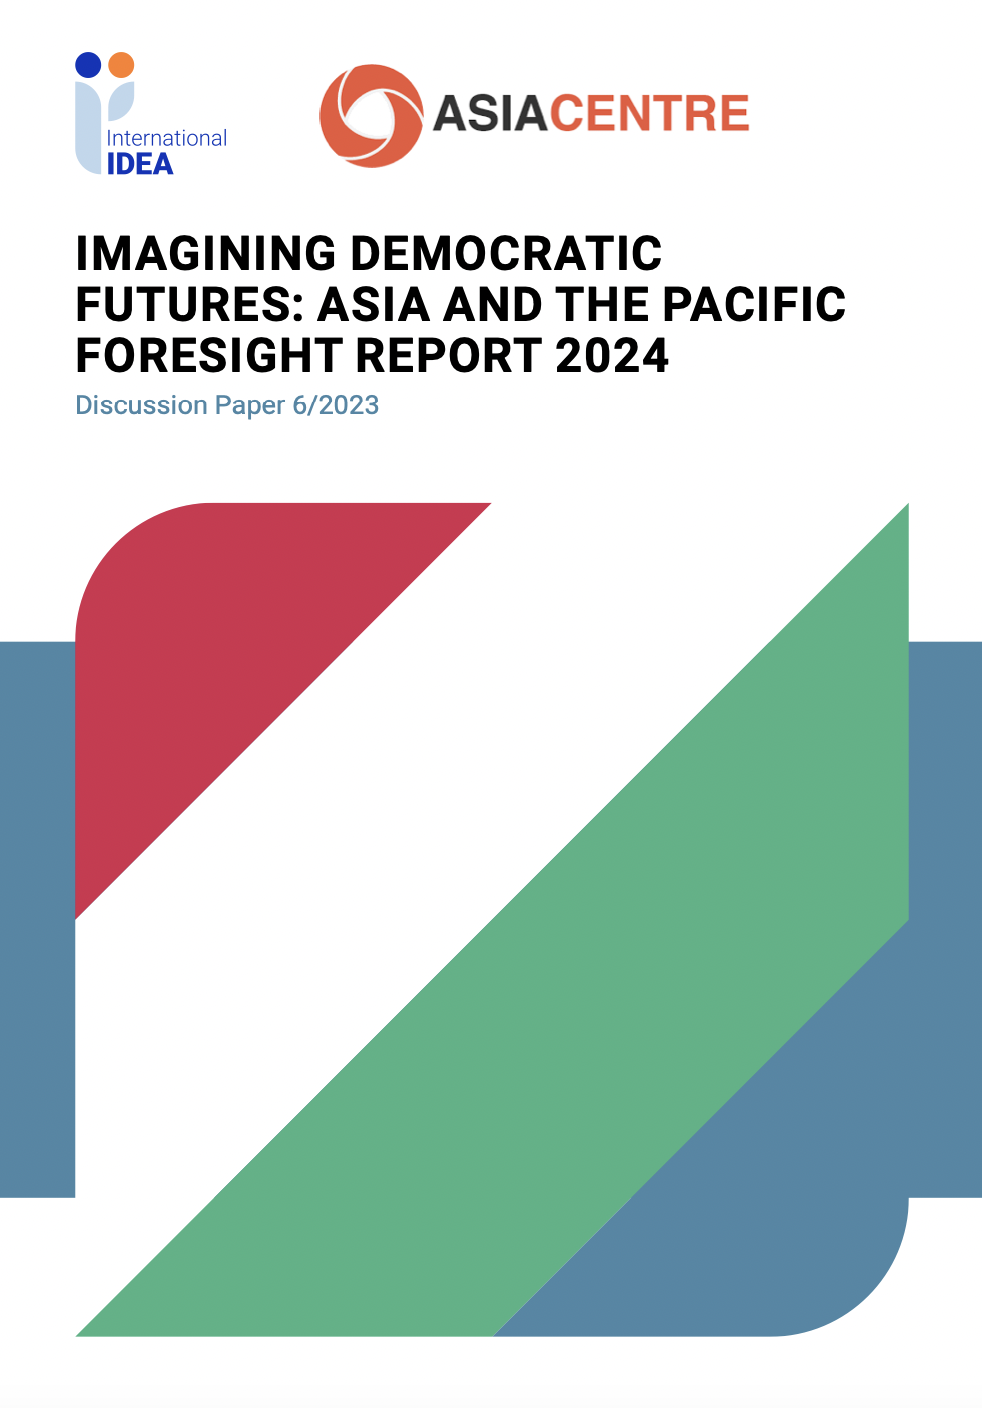 Imagining Democratic Futures: Asia and the Pacific Foresight Report 2024